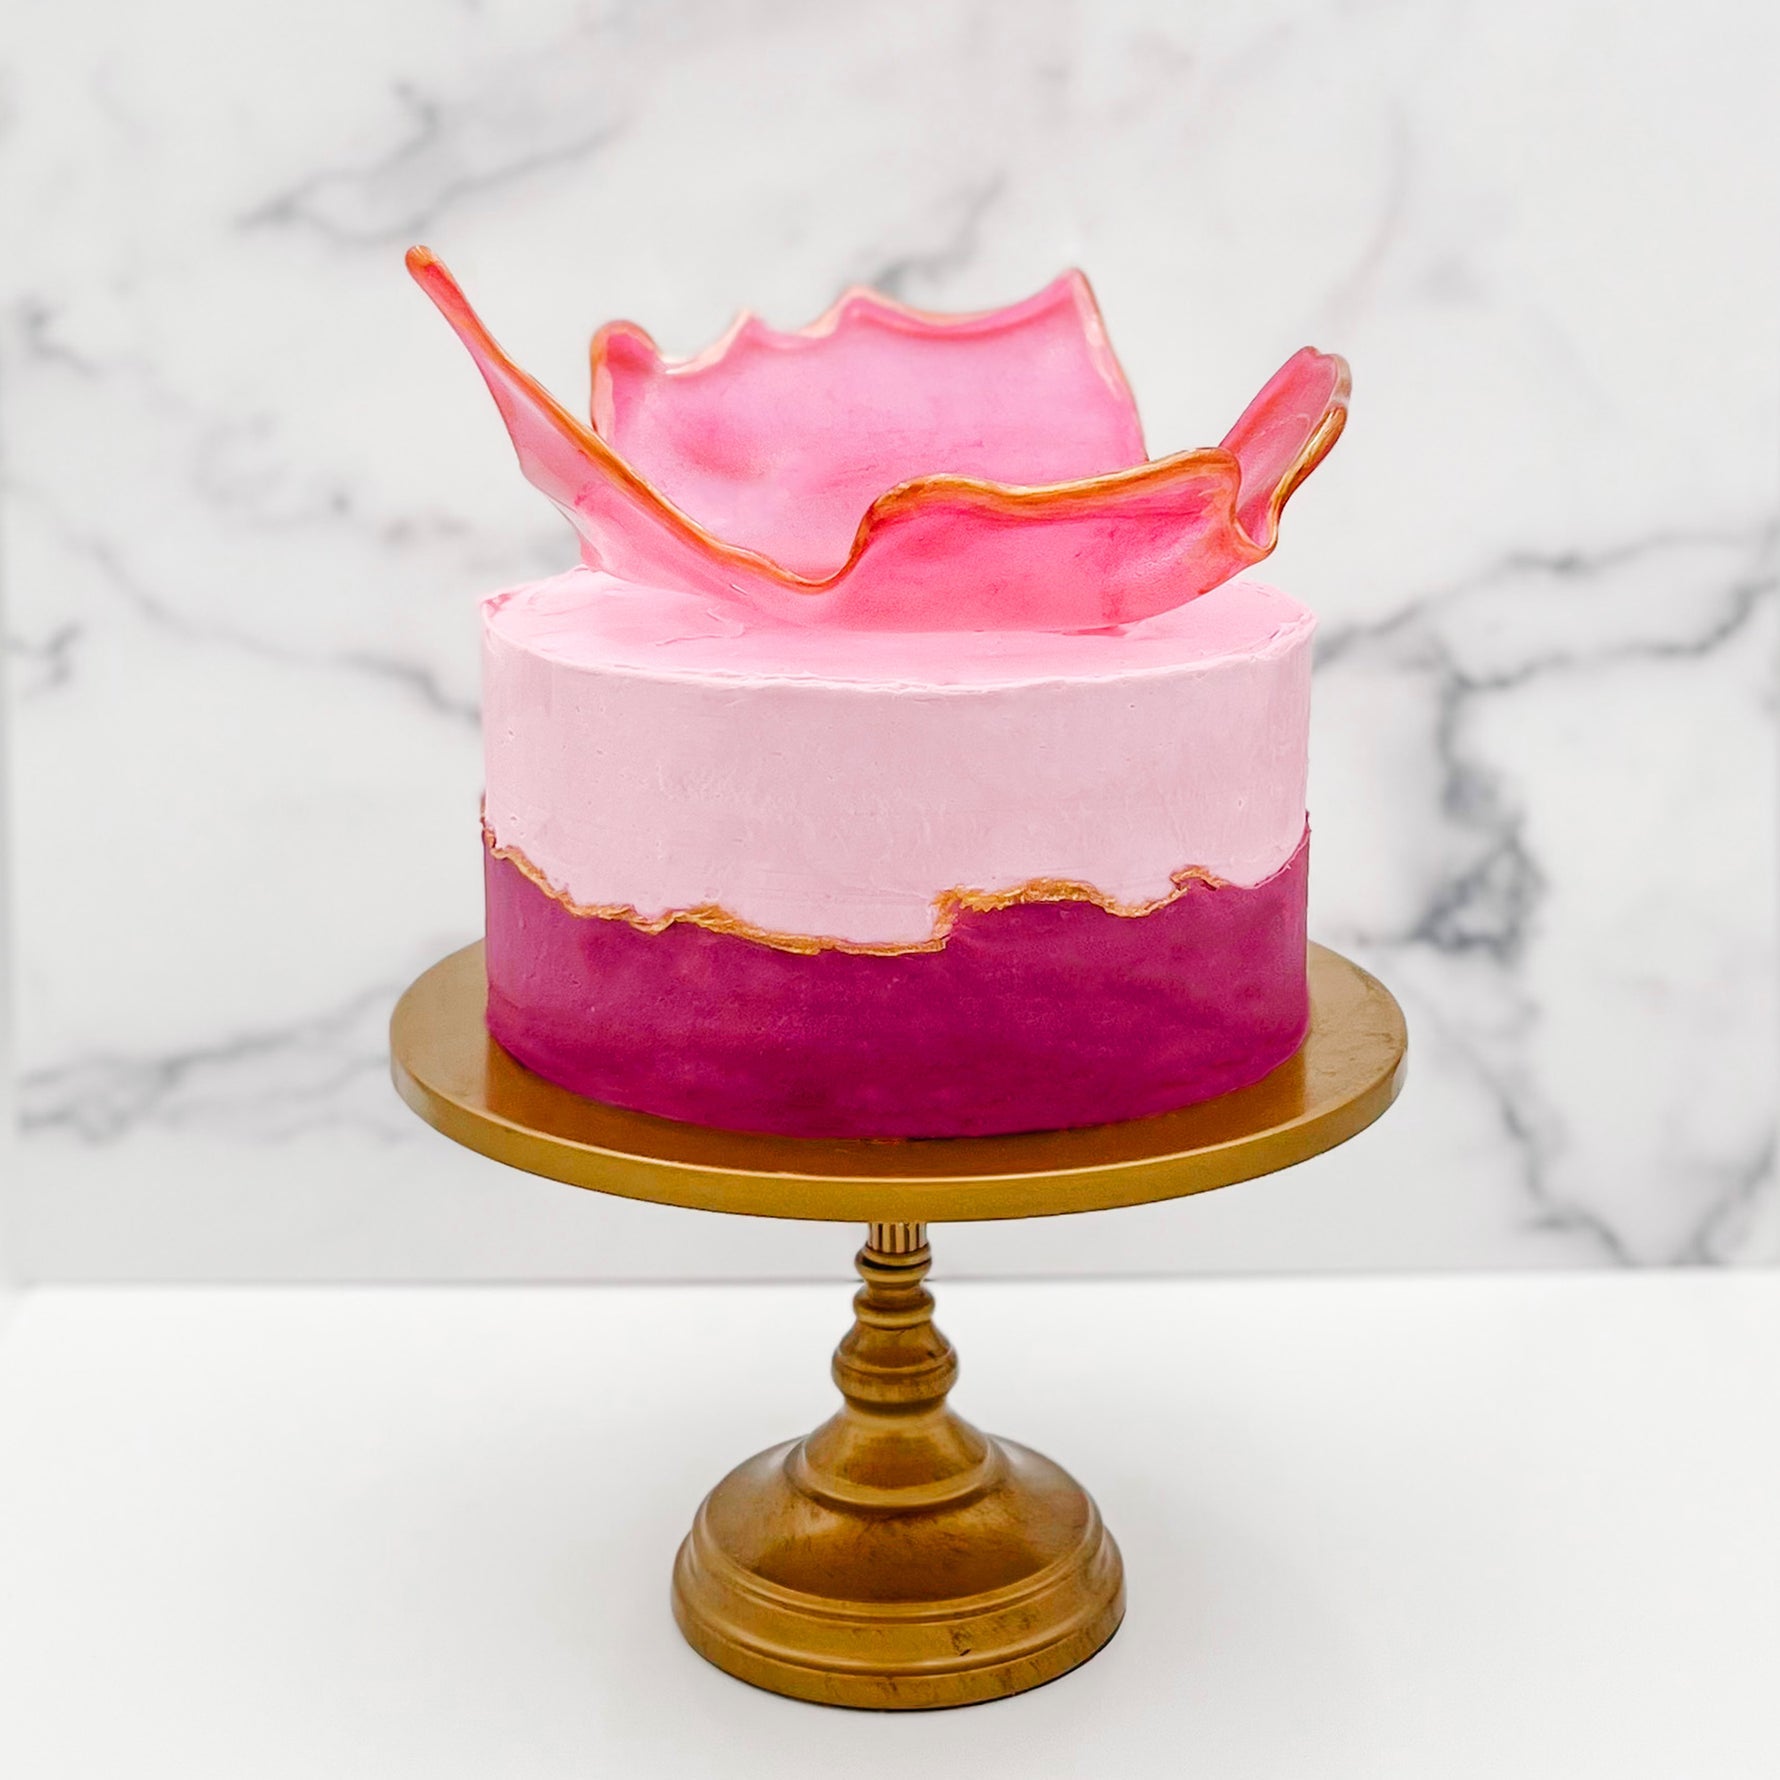 Pearly Isomalt Cake at CakePlaza, Online Delivery within 3Hrs